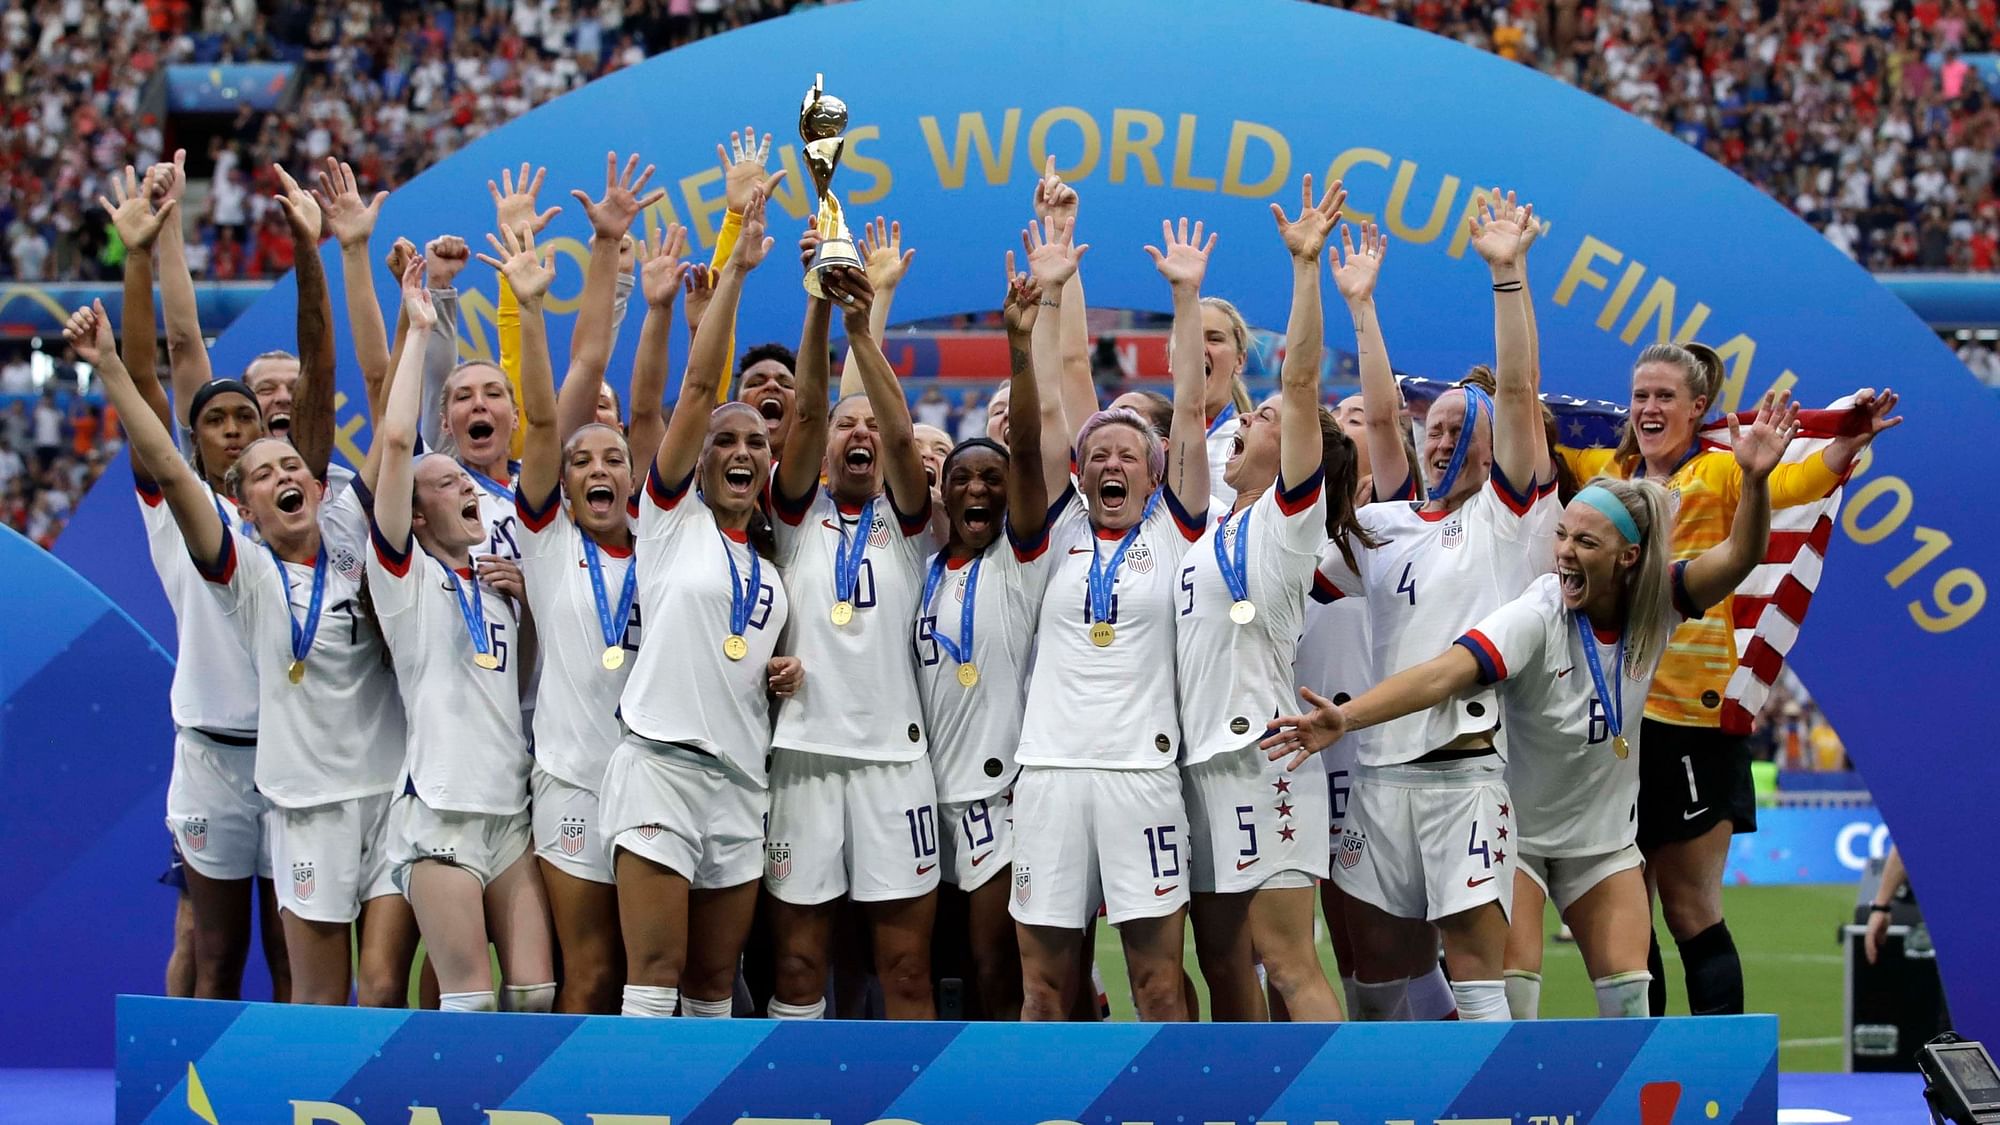  United States team celebrates with trophy after winning the Womens World Cup final soccer match between US and The Netherlands at the Stade de Lyon in Decines, France